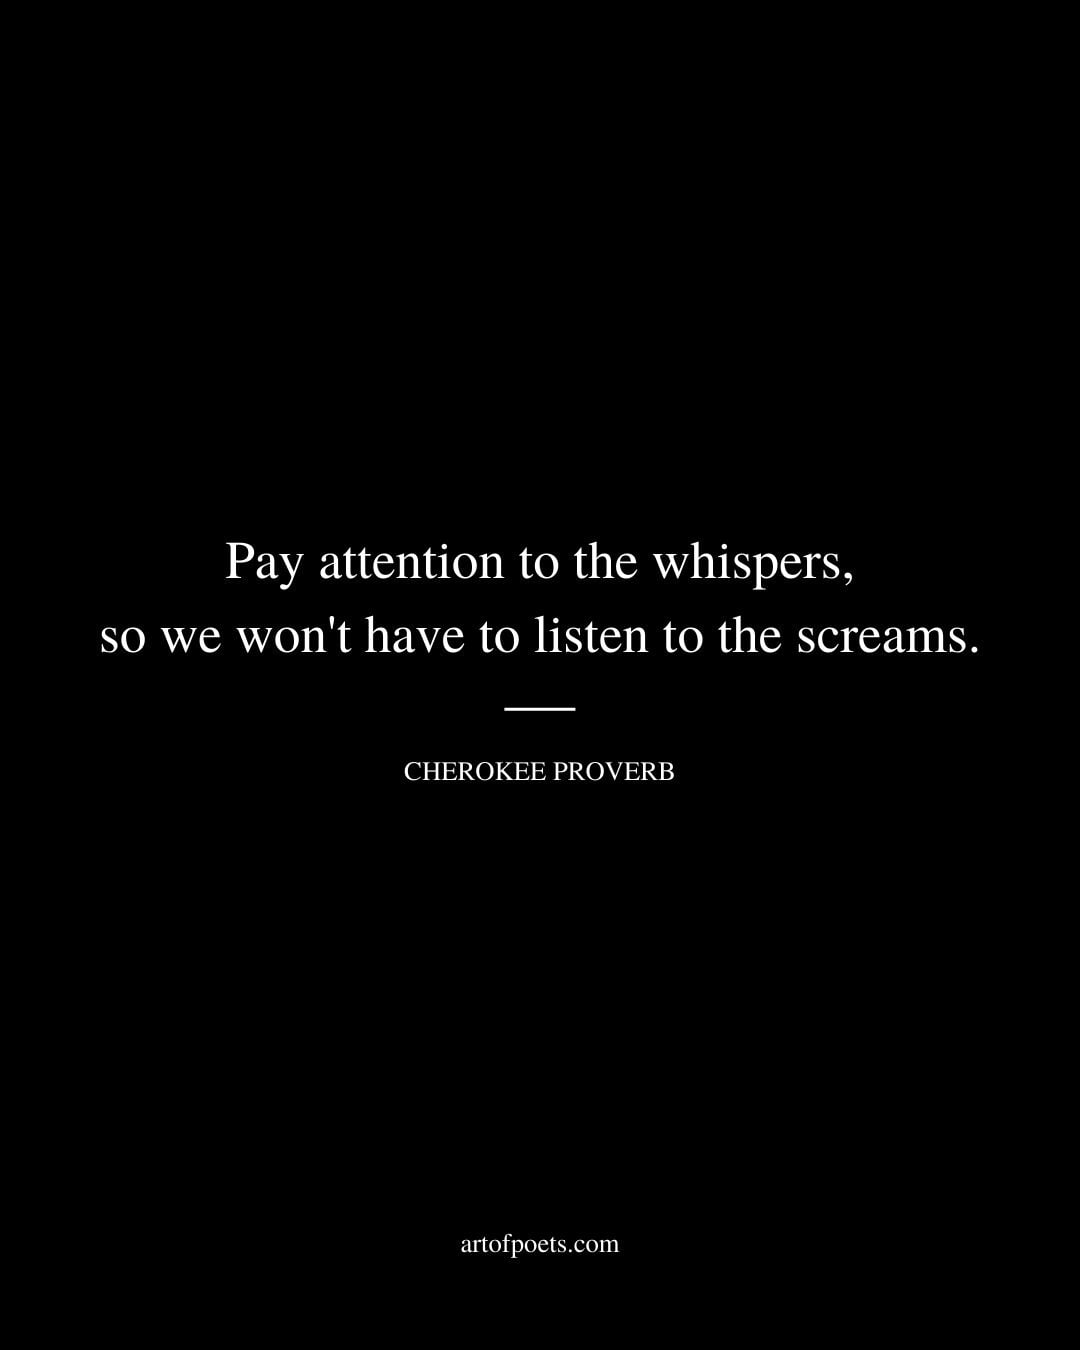 Pay attention to the whispers so we wont have to listen to the screams